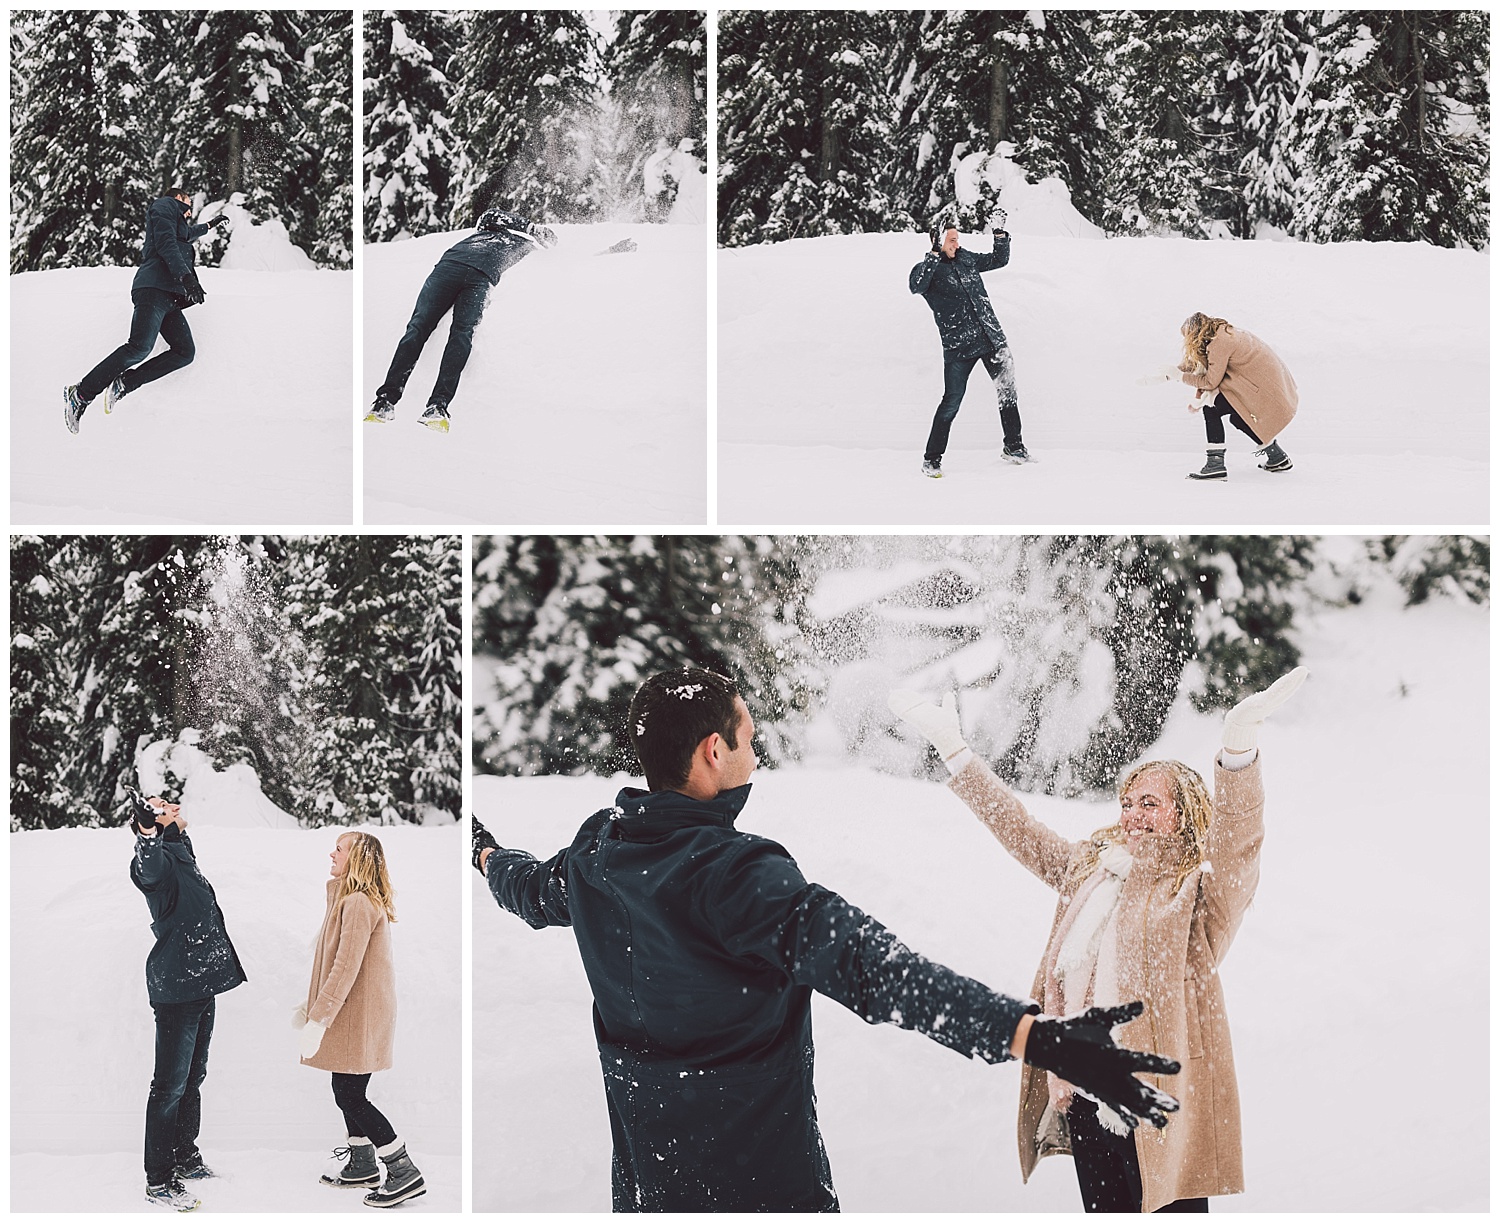 Snowy engagement session at Snoqualmie Pass by Luma Weddings